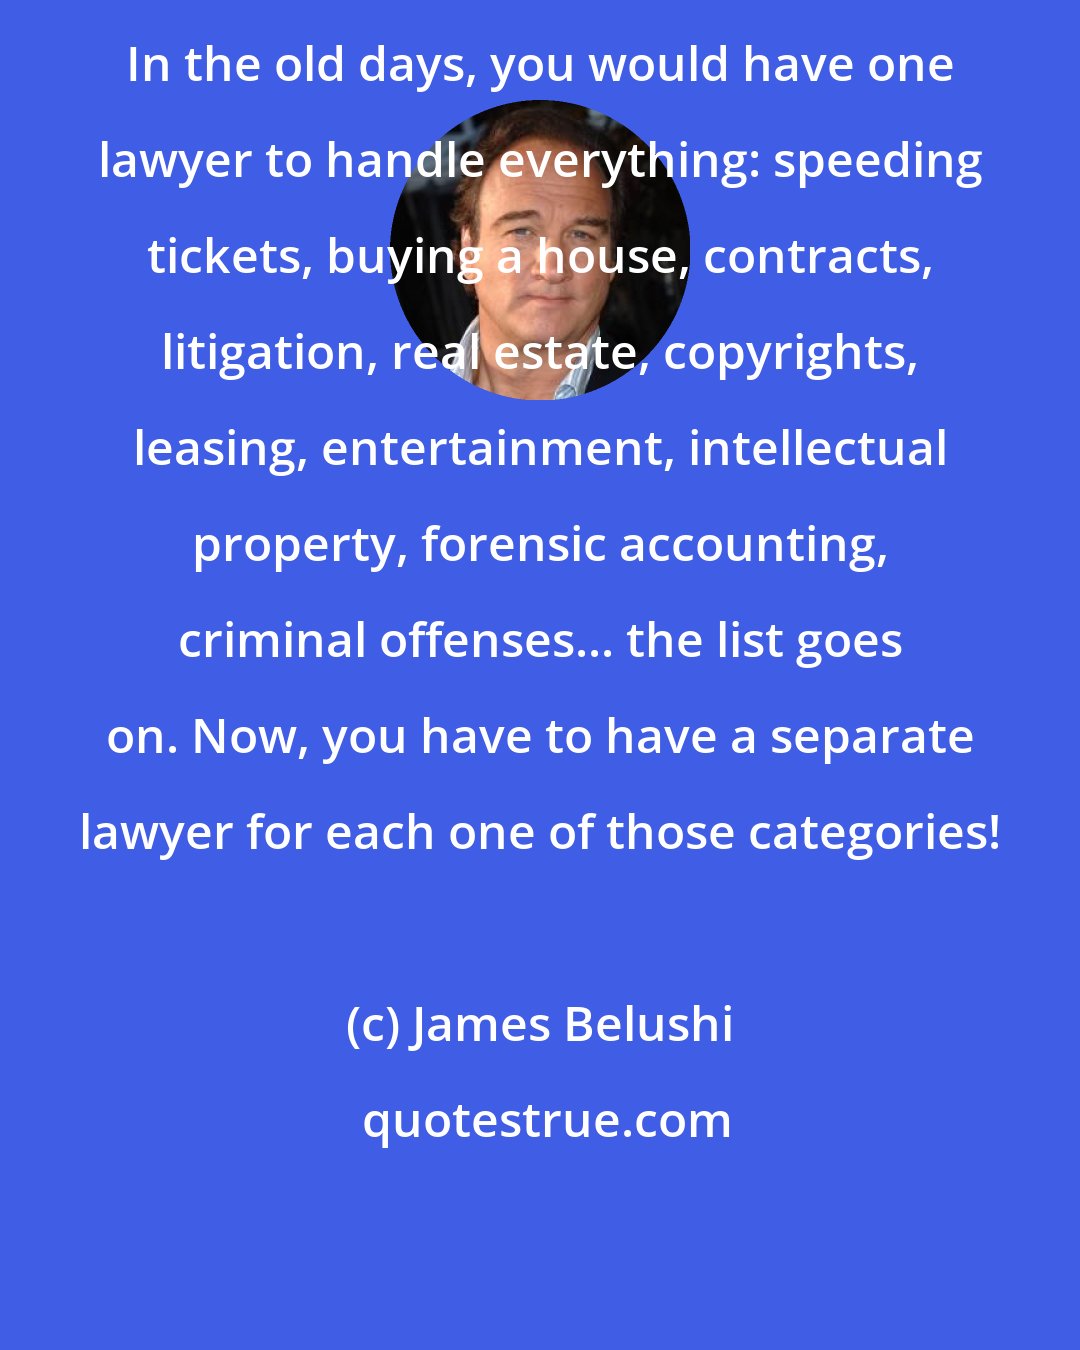 James Belushi: In the old days, you would have one lawyer to handle everything: speeding tickets, buying a house, contracts, litigation, real estate, copyrights, leasing, entertainment, intellectual property, forensic accounting, criminal offenses... the list goes on. Now, you have to have a separate lawyer for each one of those categories!